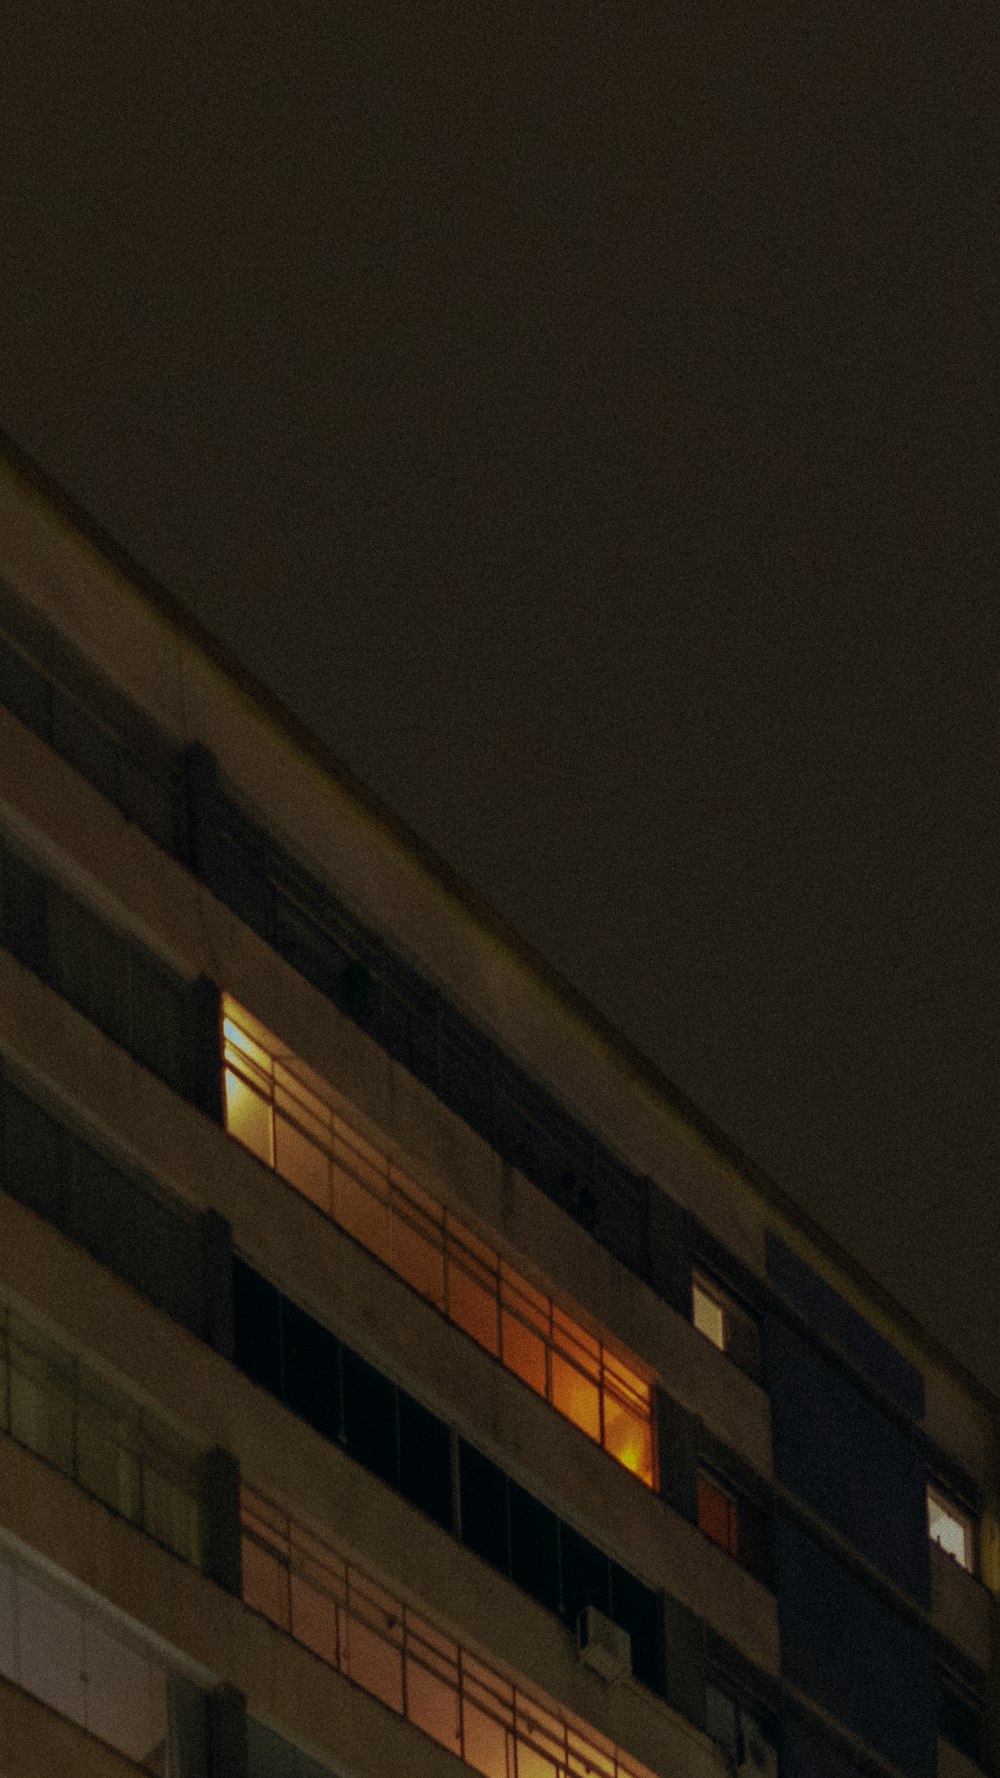 an airplane flying over a building at night